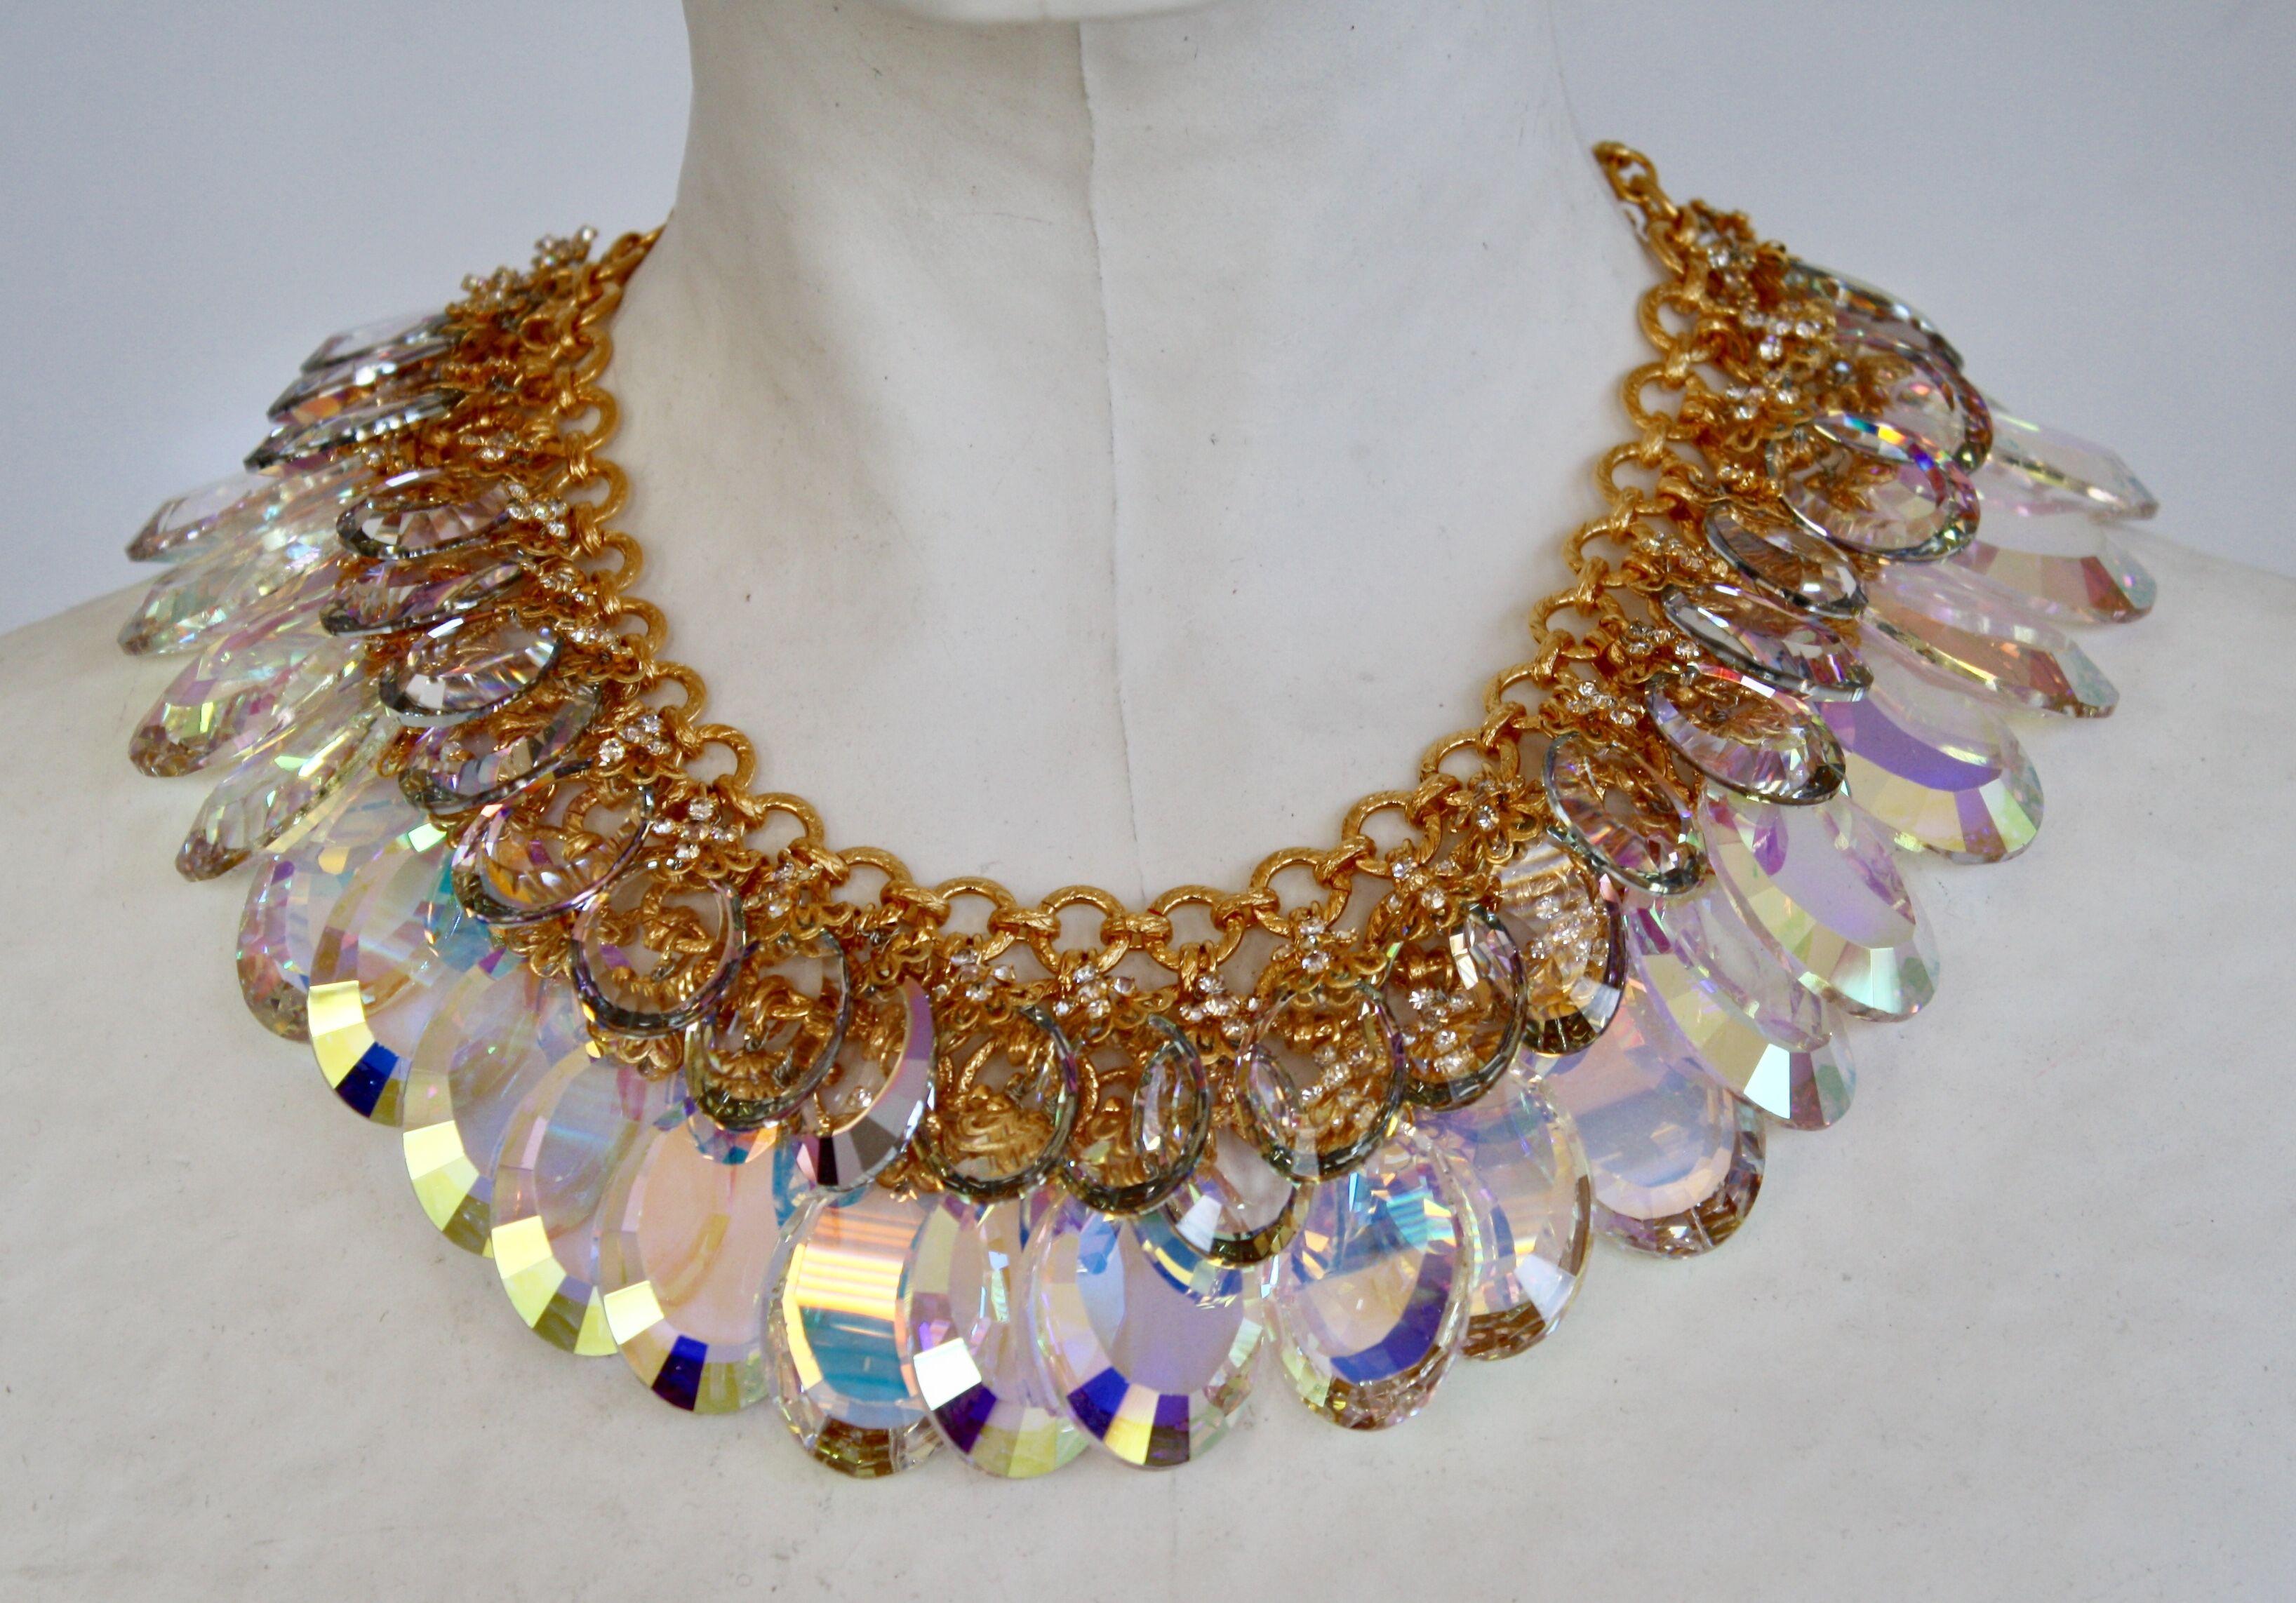 Vintage iridescent glass disc double row necklace on gorgeous vintage gold chain from Francoise Montague.
